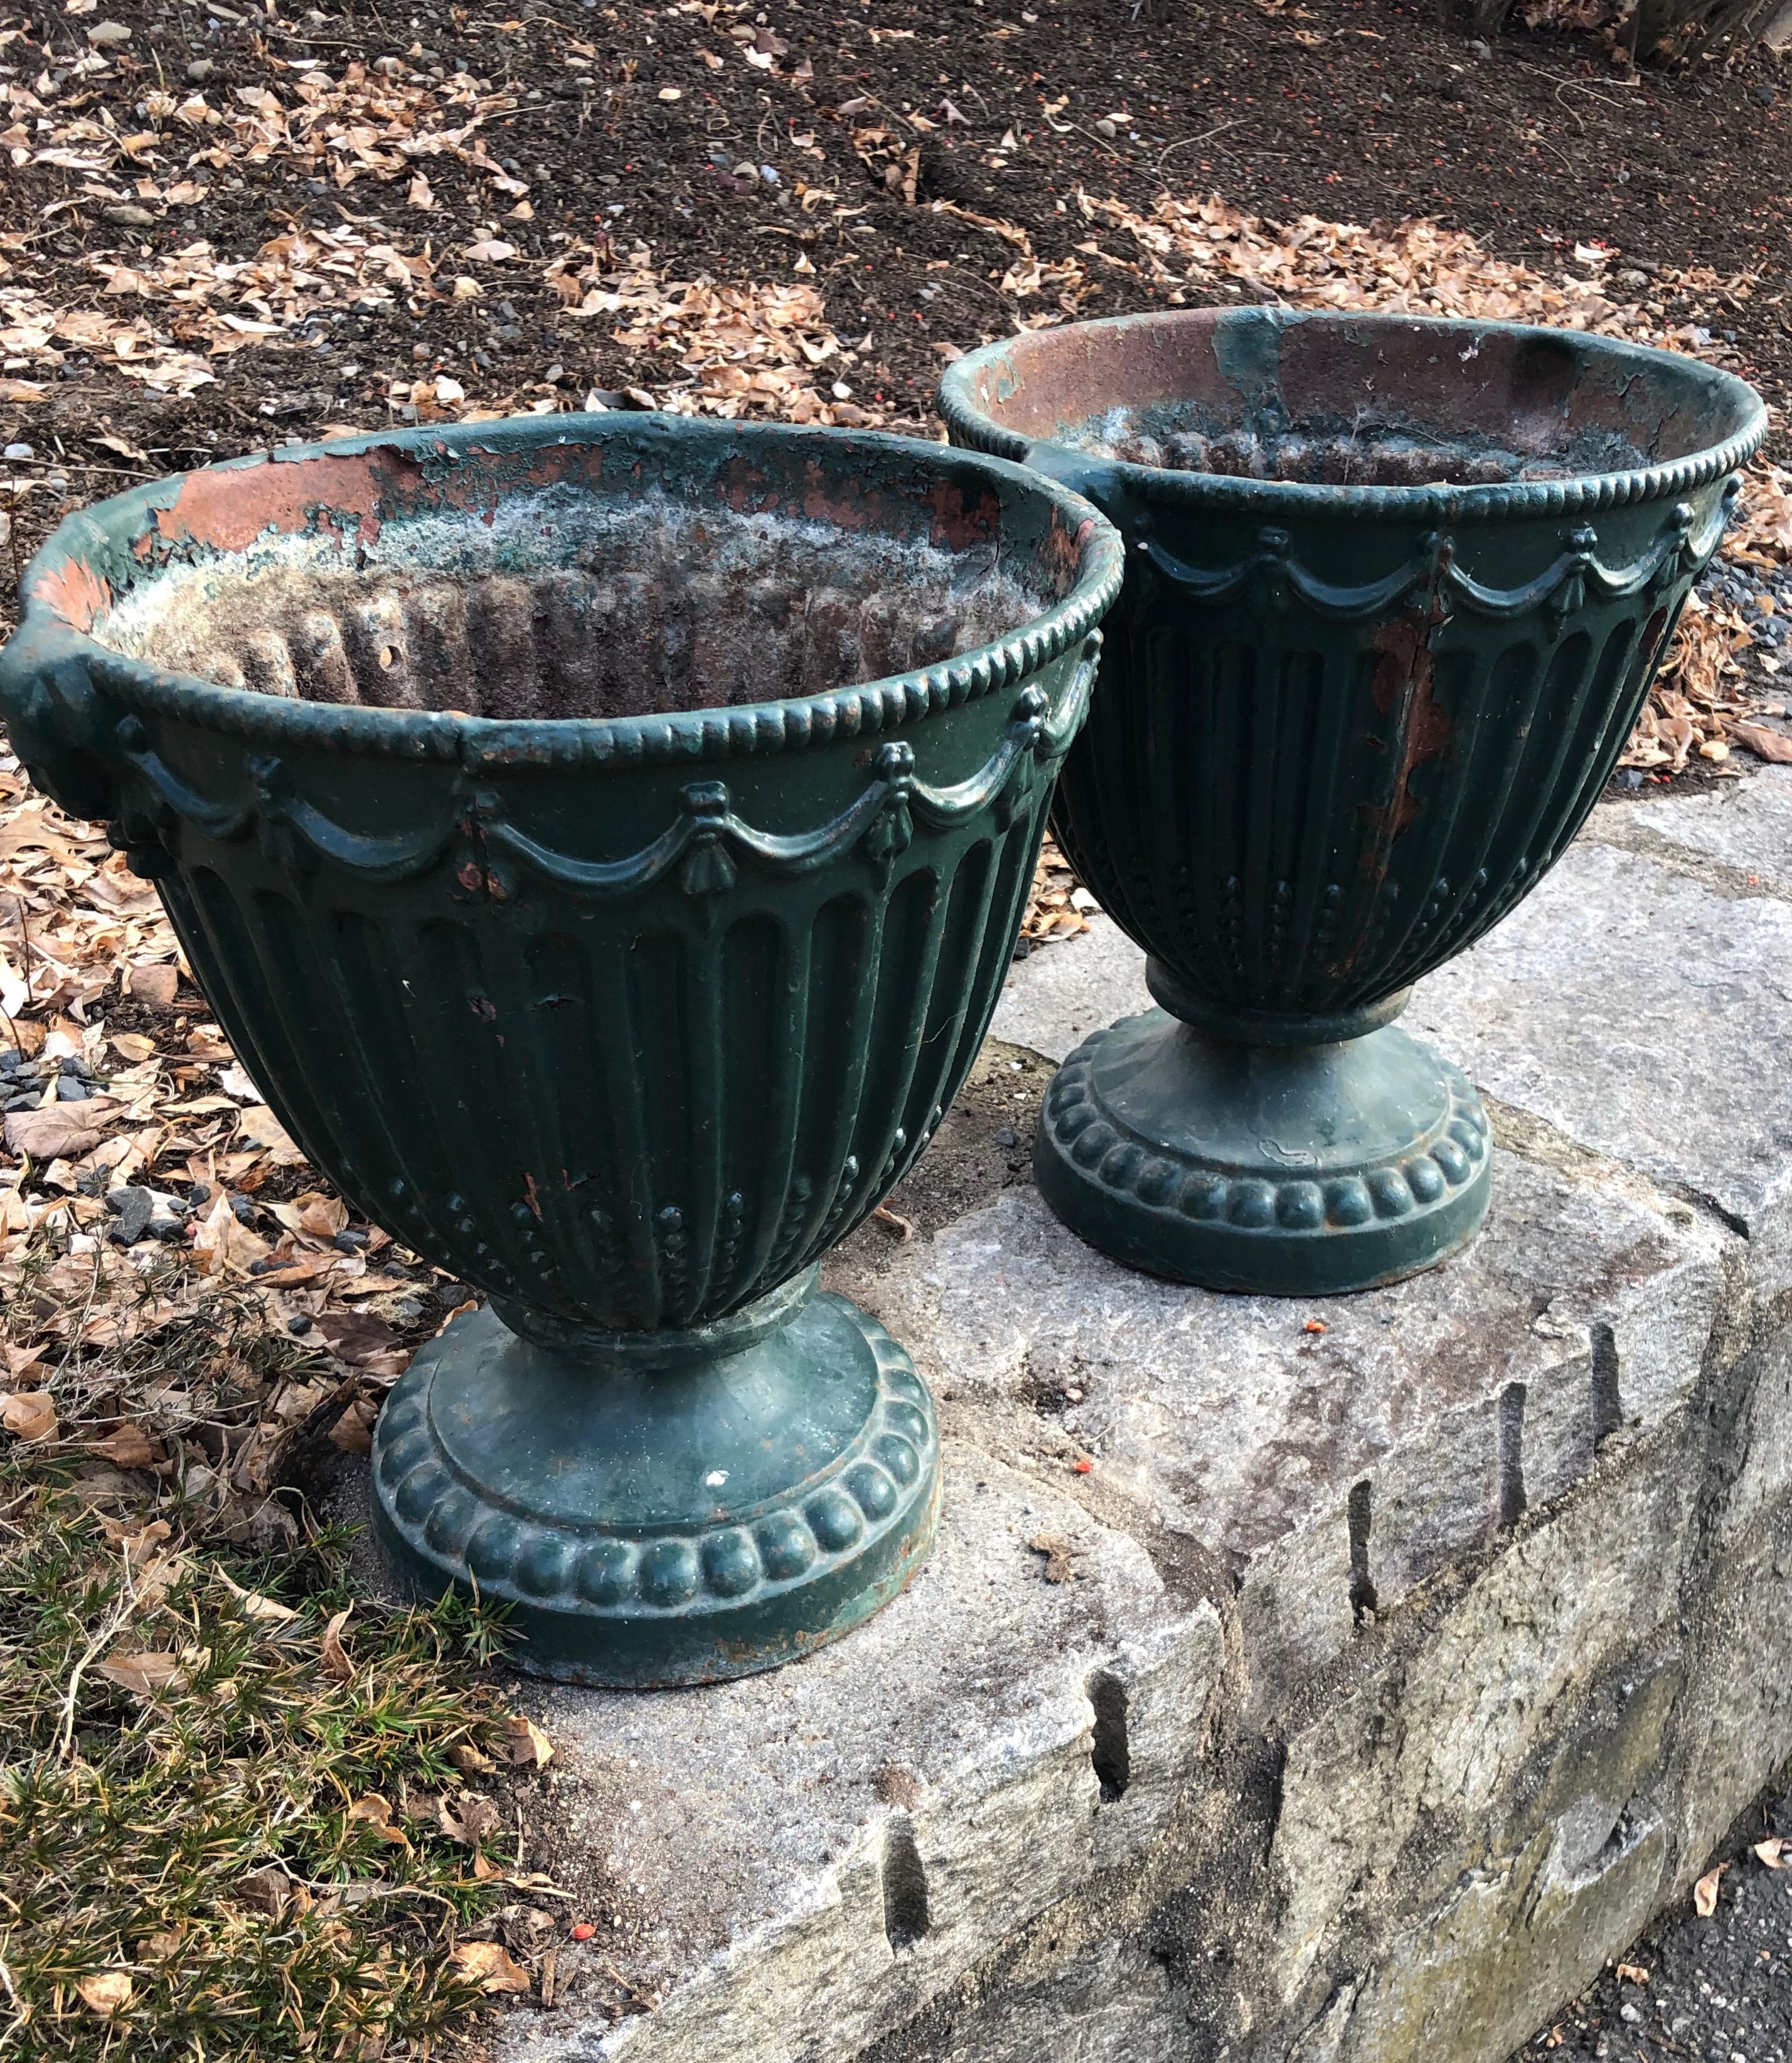 These charming urns are the perfect accent pieces for your tabletop. Made of cast iron and dating to the late 19th Century, they are in very good antique condition overall, with only a bit of missing paint and mild surface rusting to the outside.